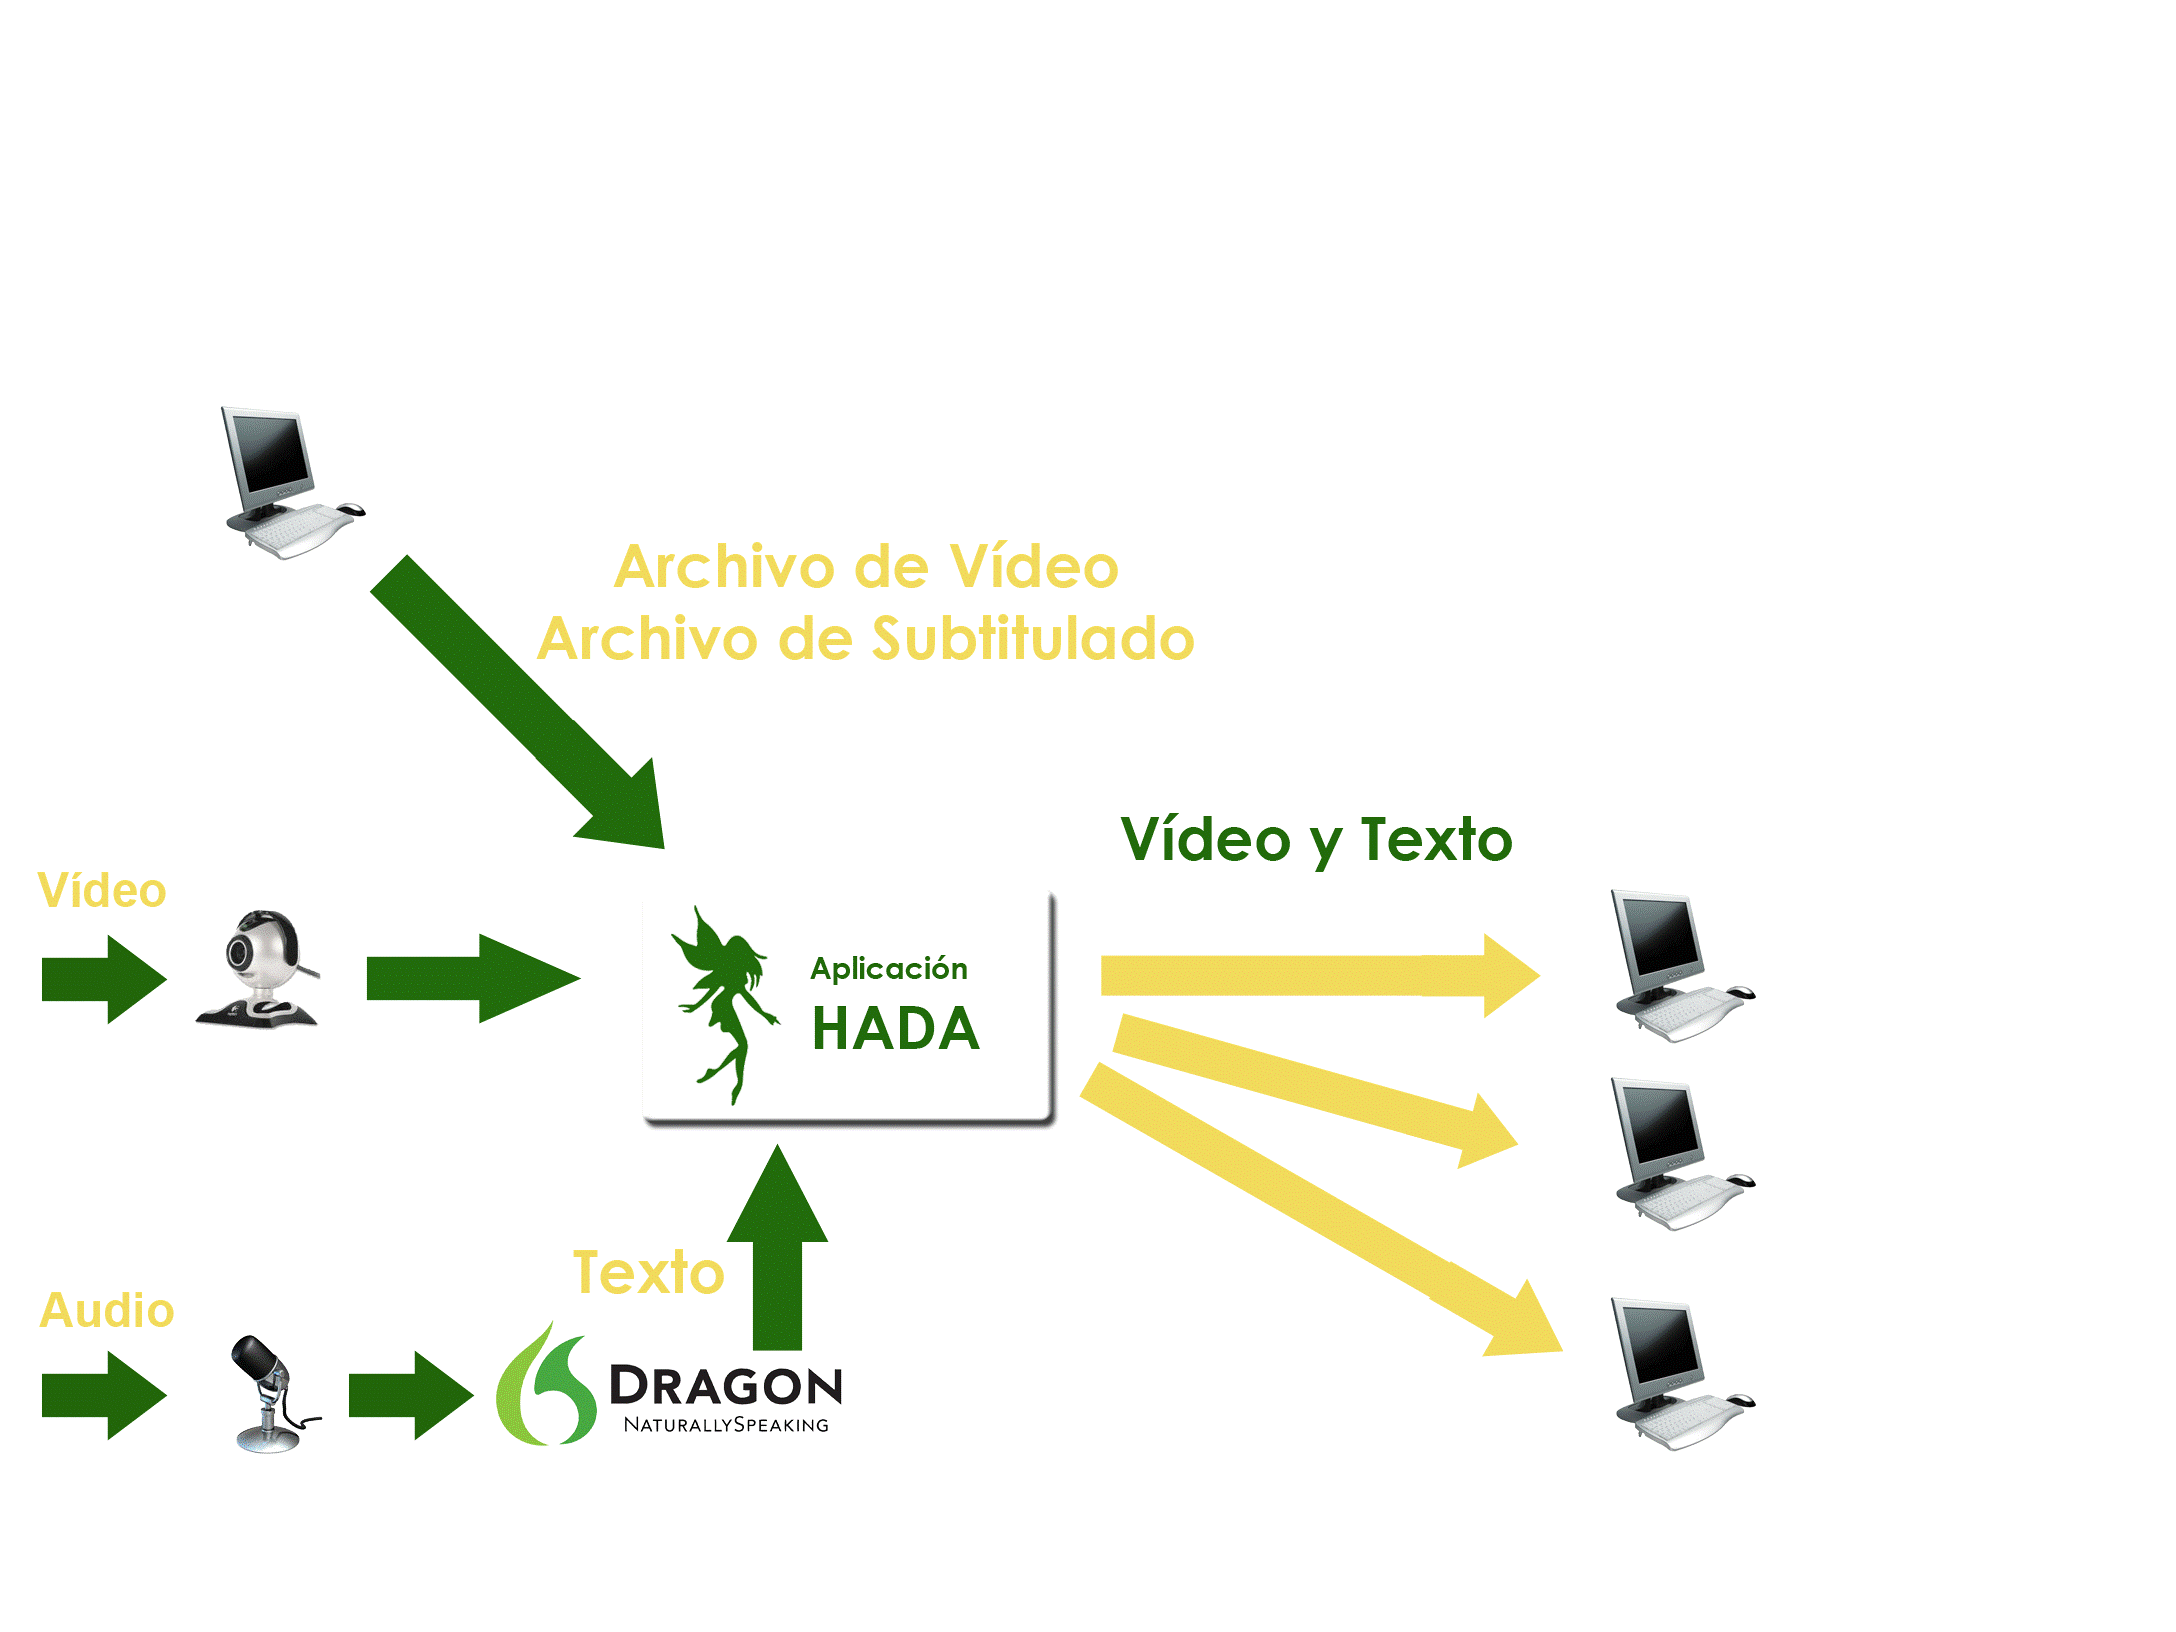 HADA (Hearing Impaired Assistance Tool). Real-time text and video streaming for the hearing impaired people